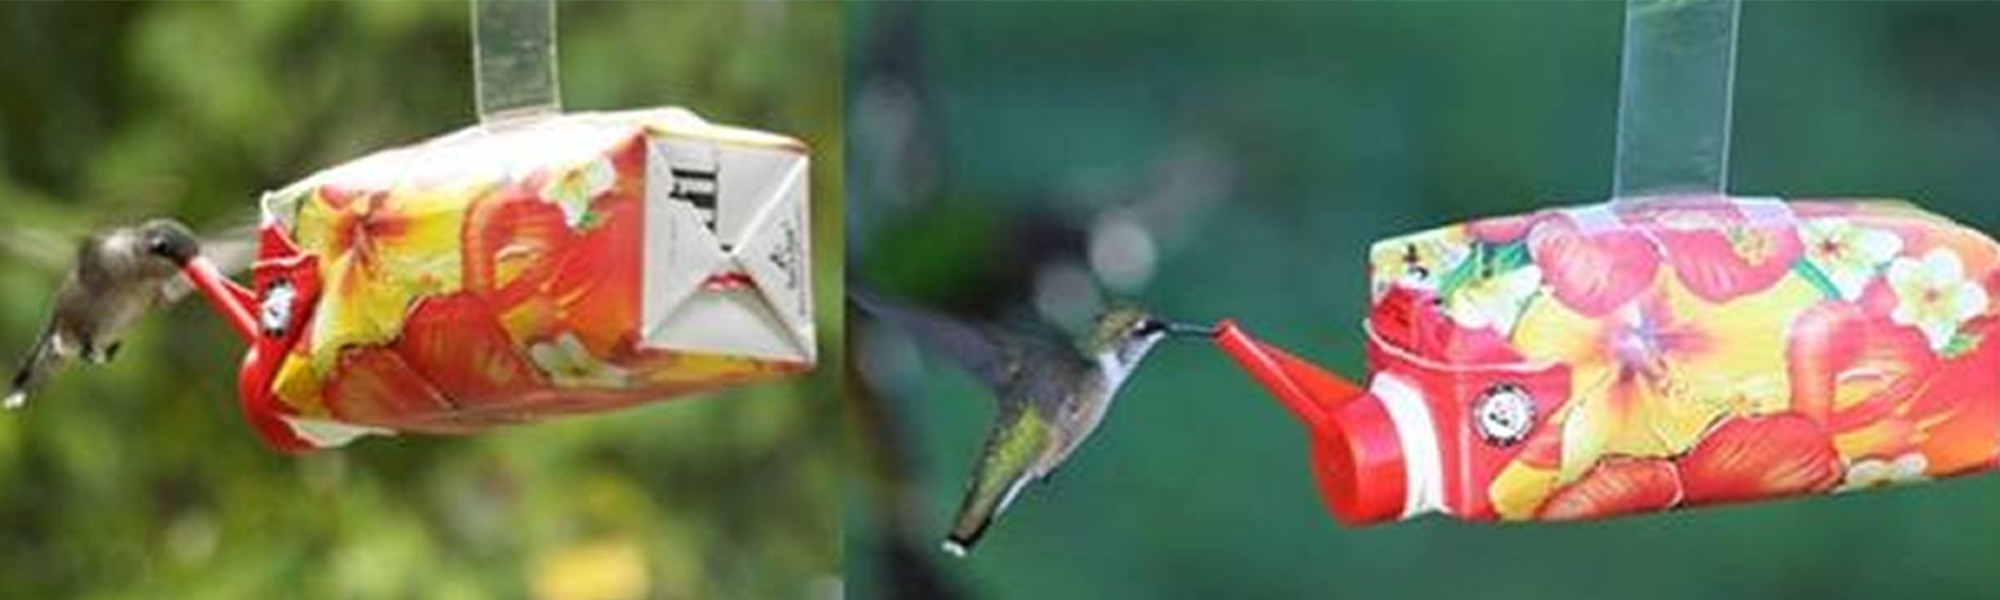 EZNectar® Happy Hummers!® Fast-Feeder® Prefilled, "Juice Box", Recyclable,  Ready-to-use Hummingbird Feeder 330 ml (11 fl. oz.)